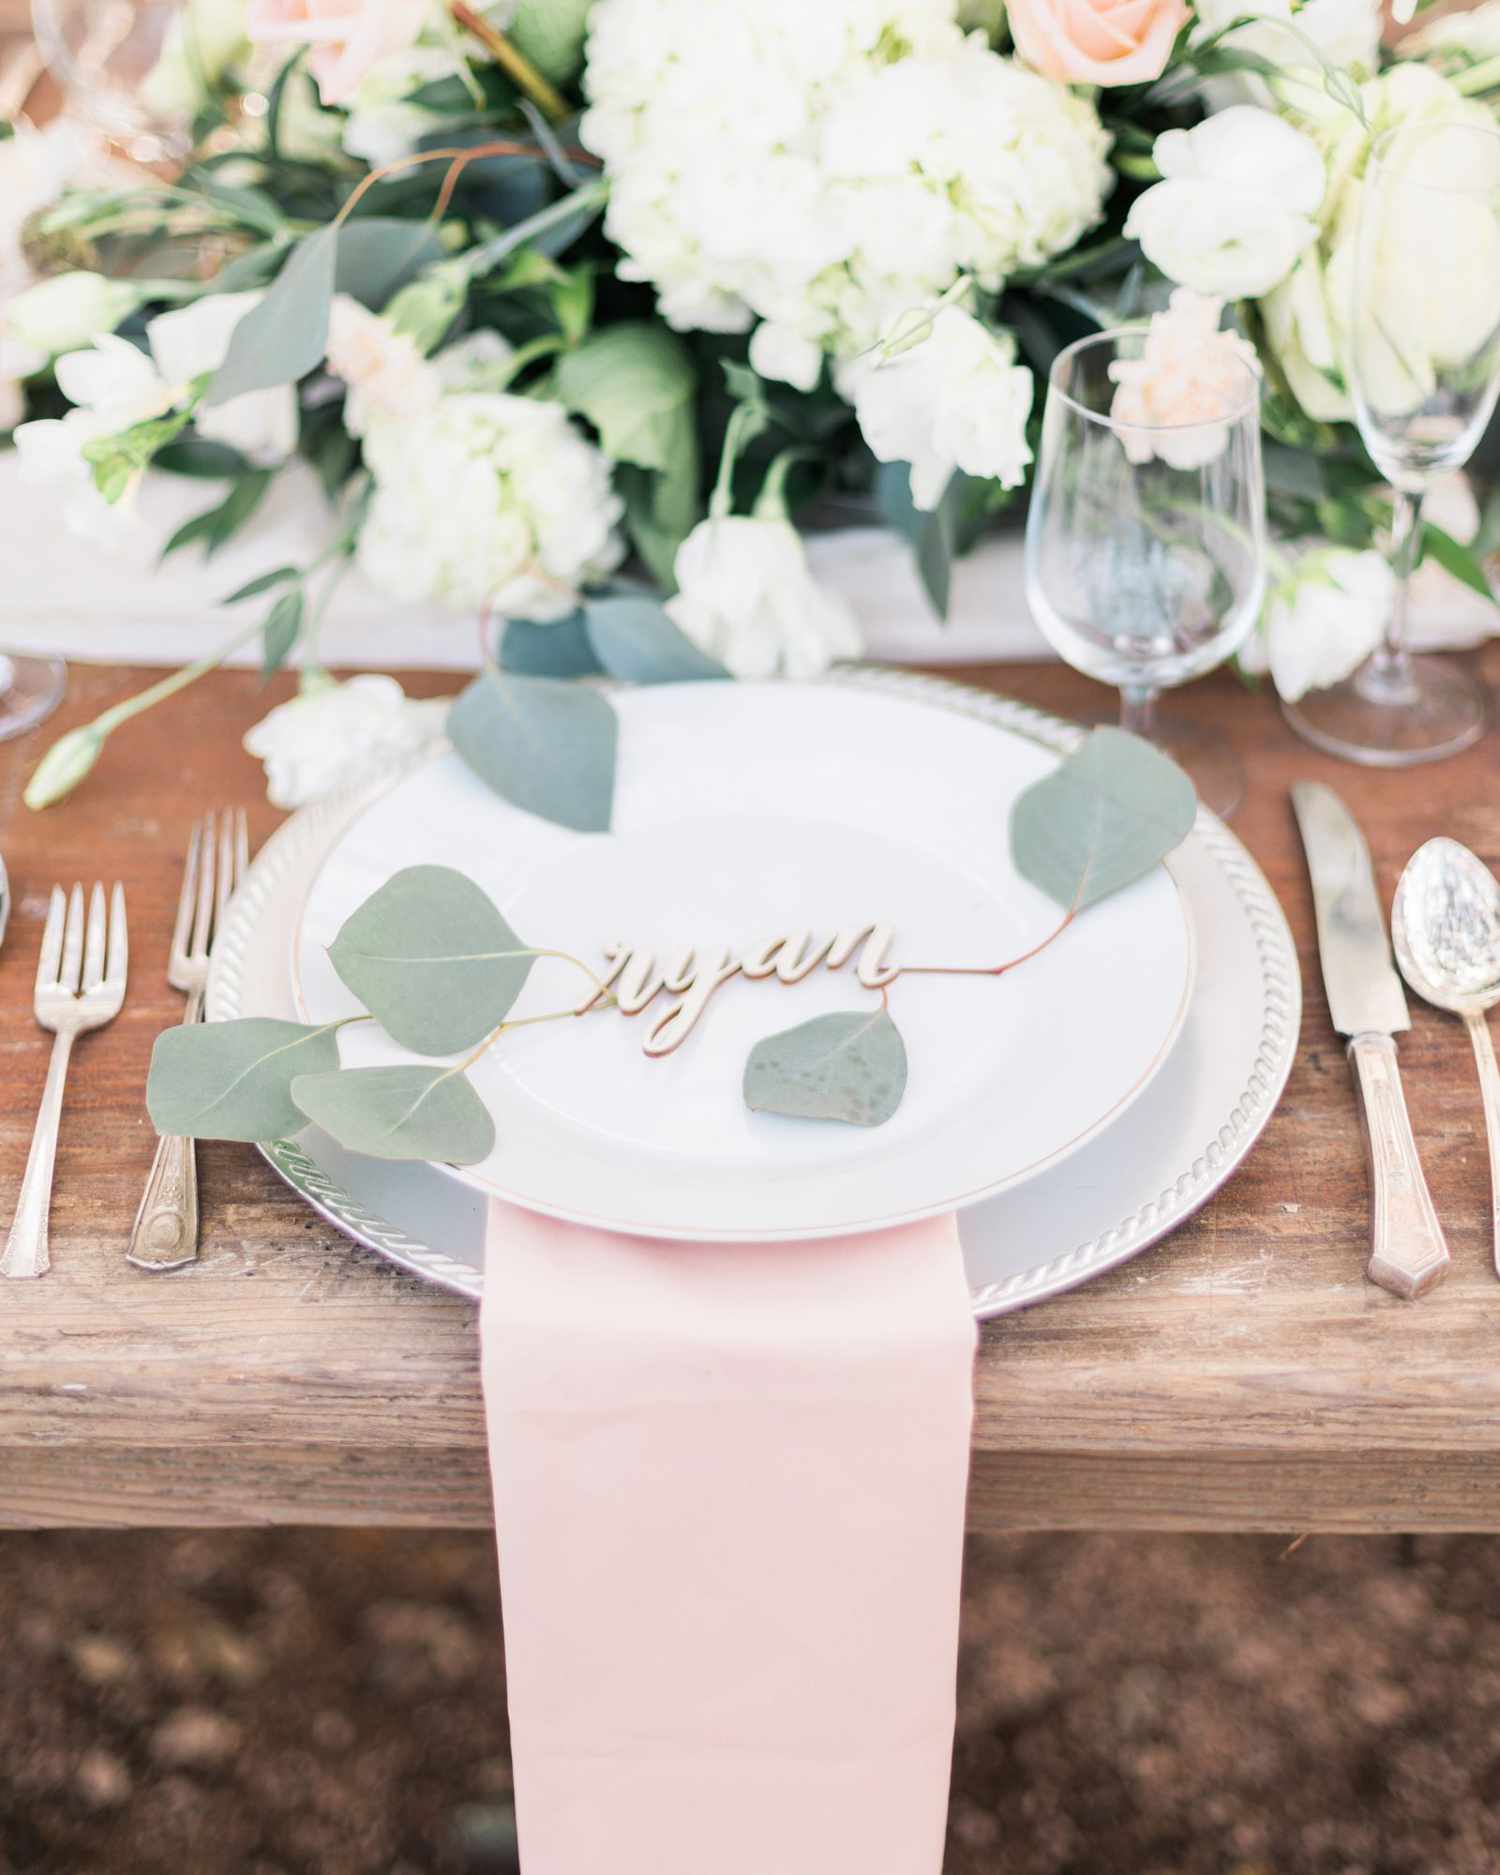 greenery to accent laser-cut place card table centerpiece